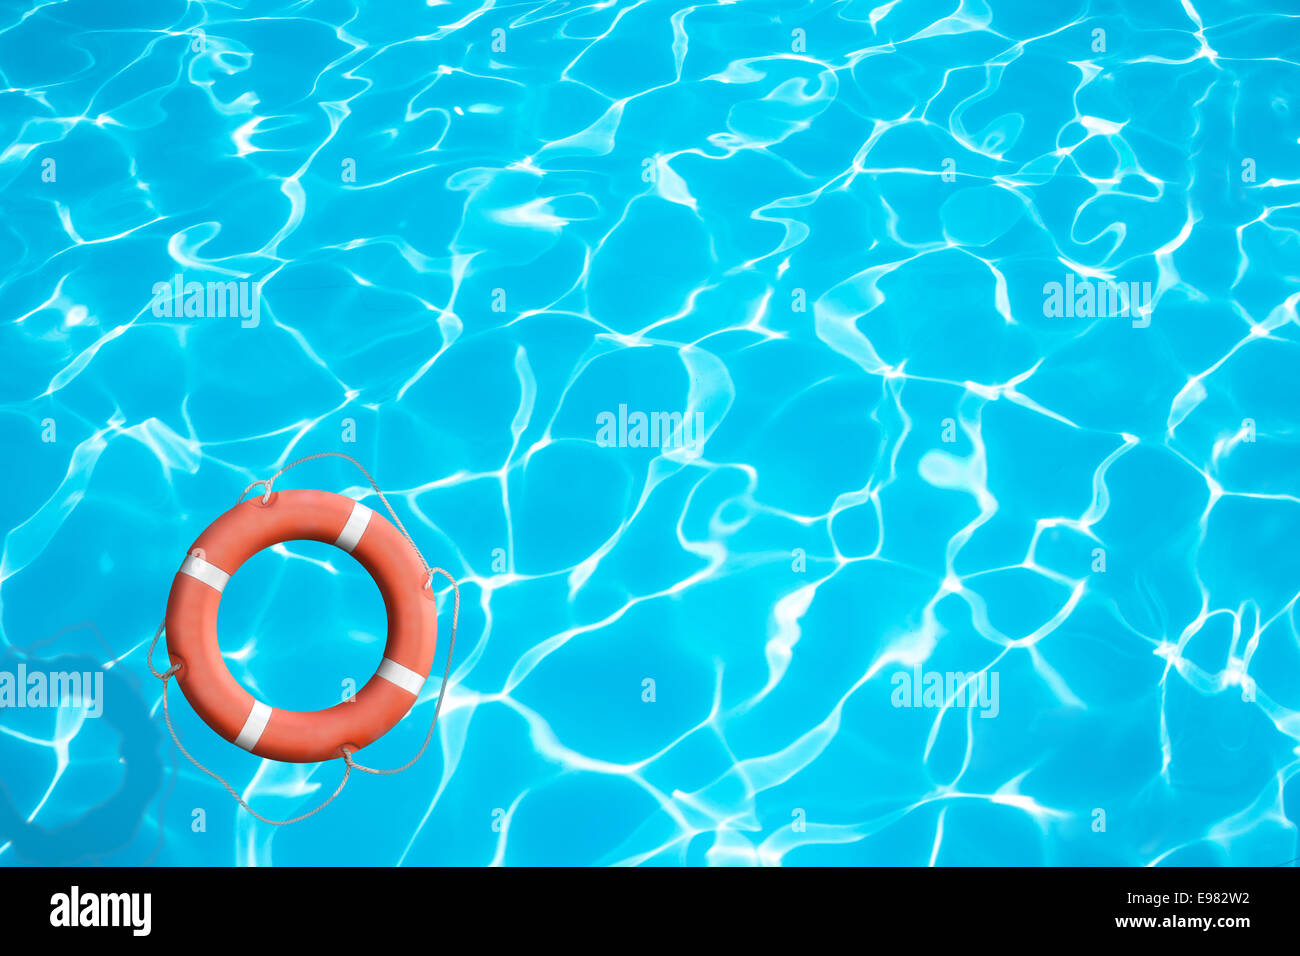 Lifebuoy on blue water surface concept Stock Photo